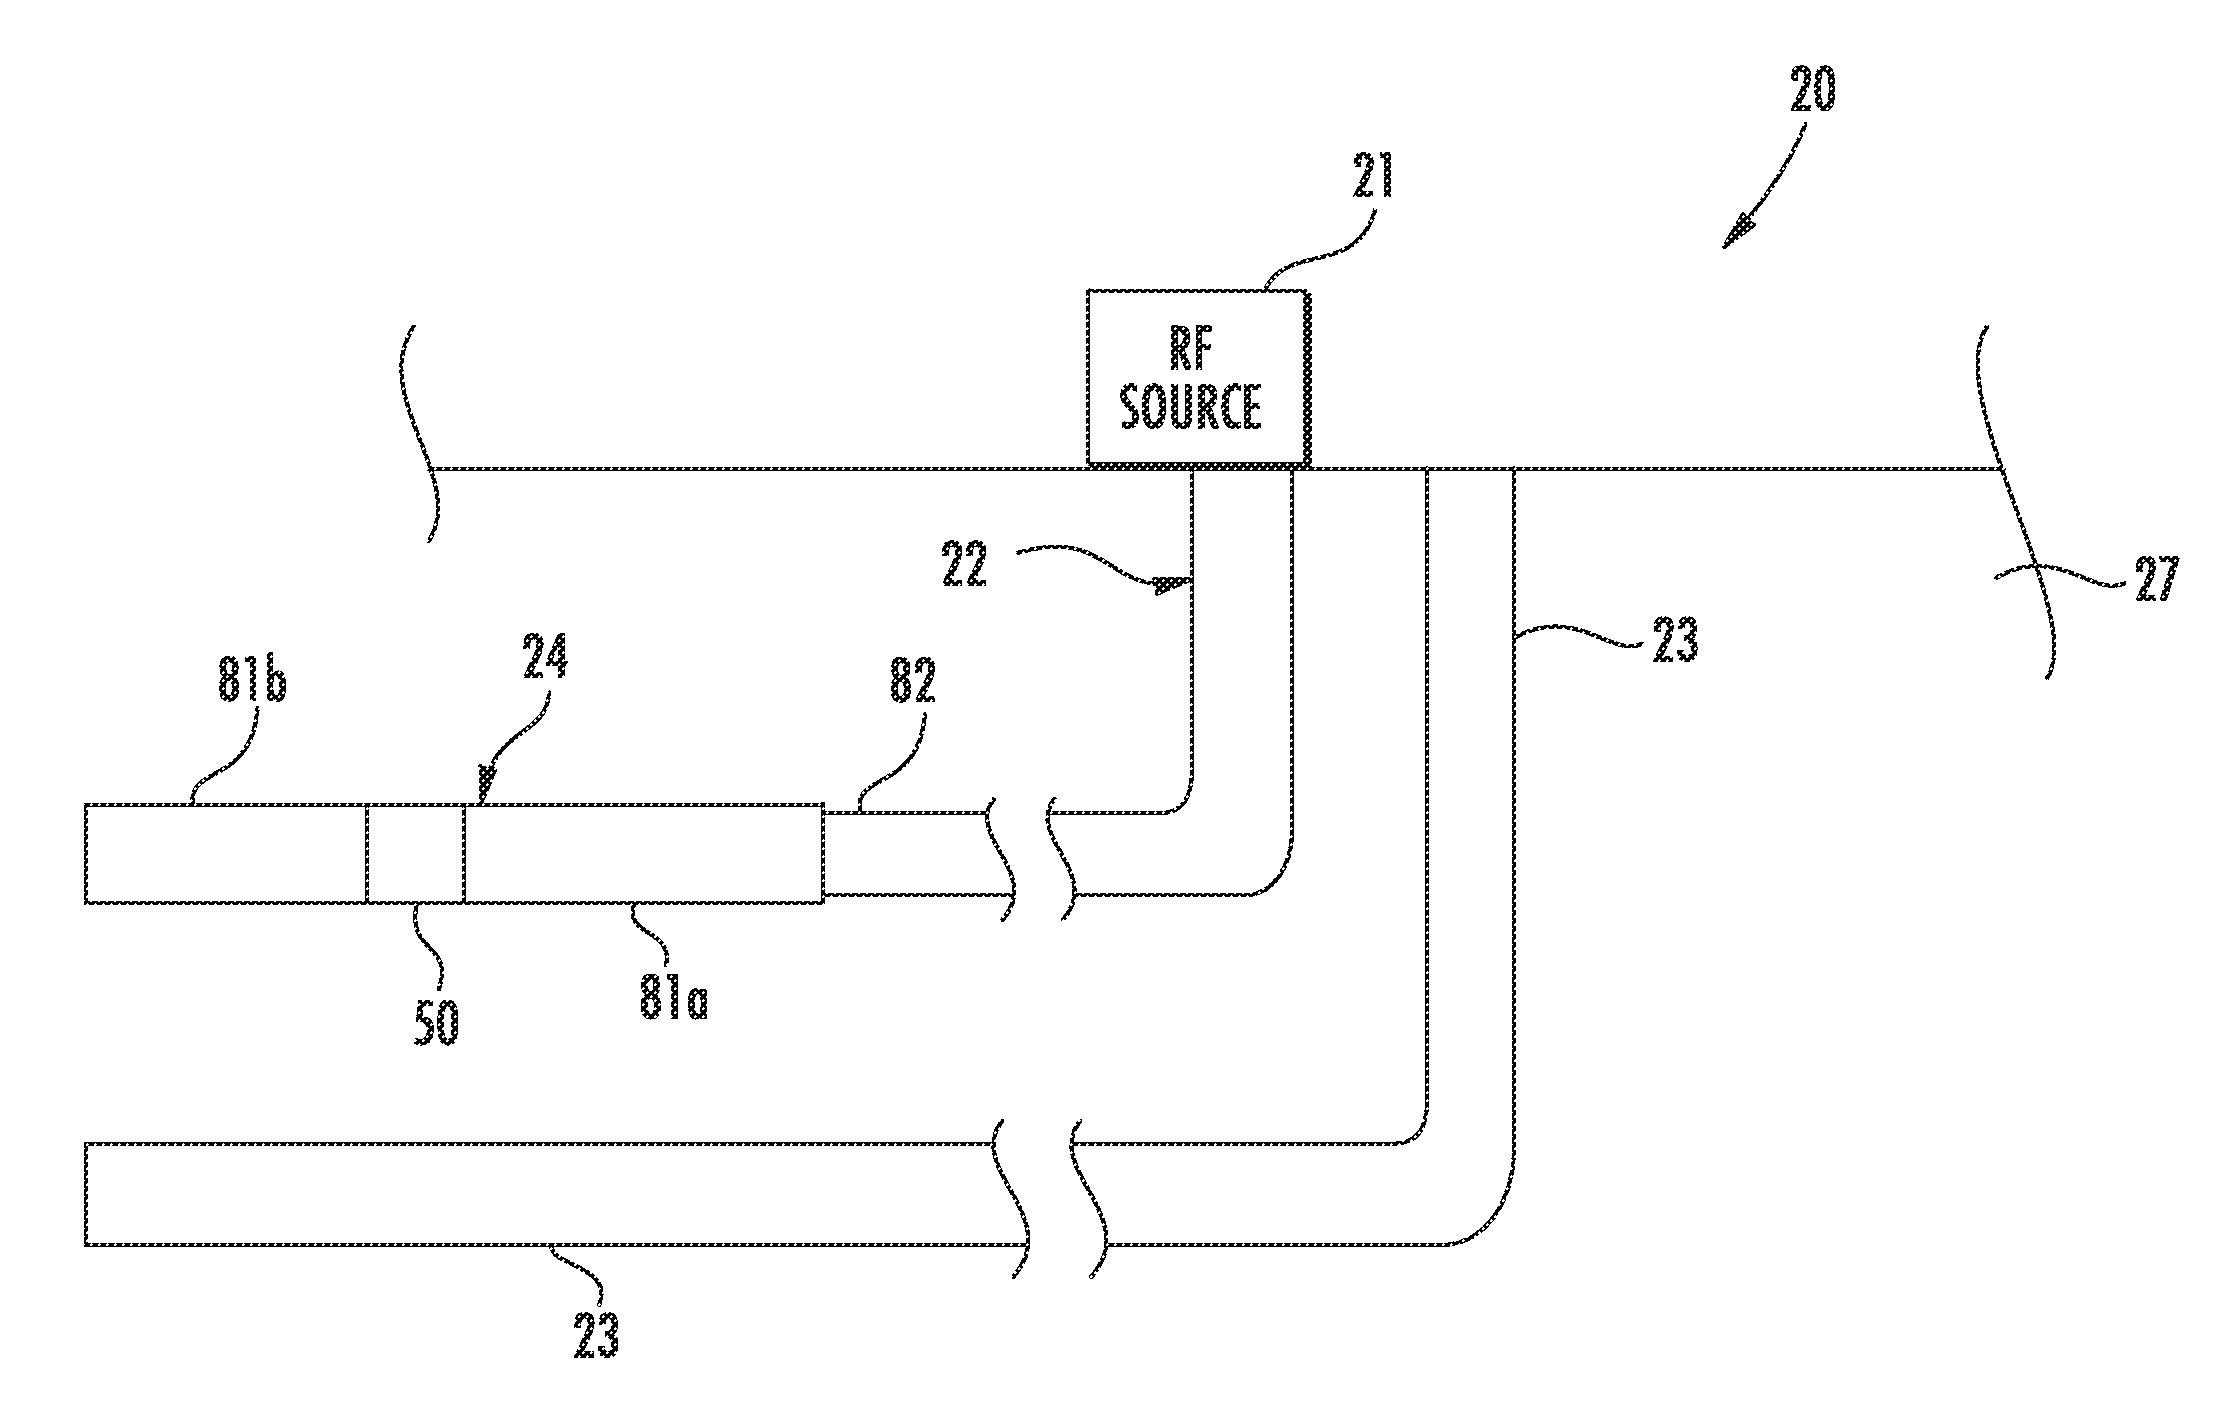 RF antenna assembly with series dipole antennas and coupling structure and related methods